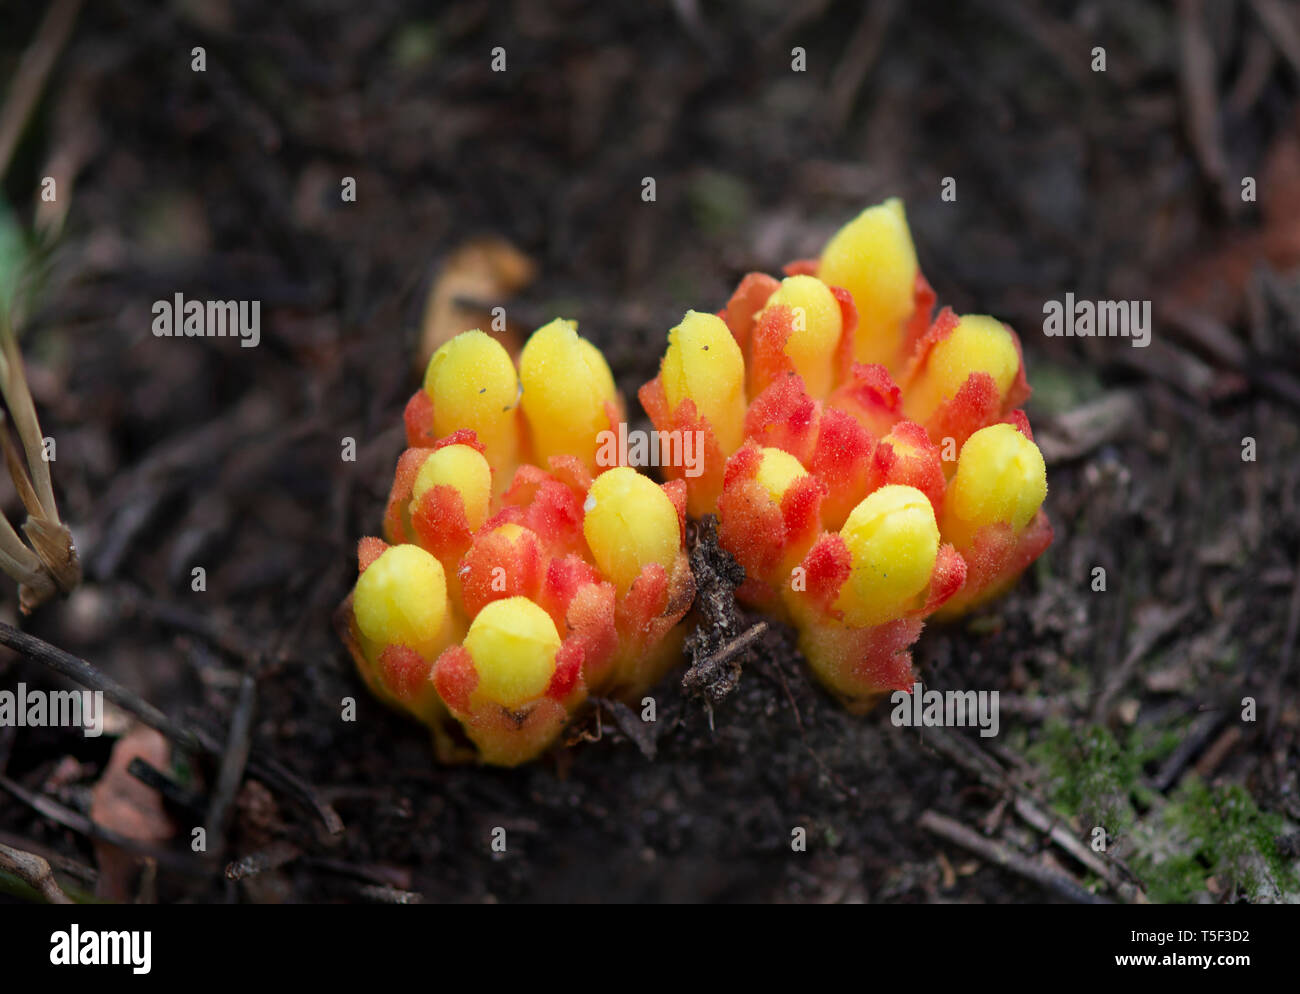 Cytinus hypocistis, ant-pollinated species, parasitic plant. Andalusia, Spain. Stock Photo